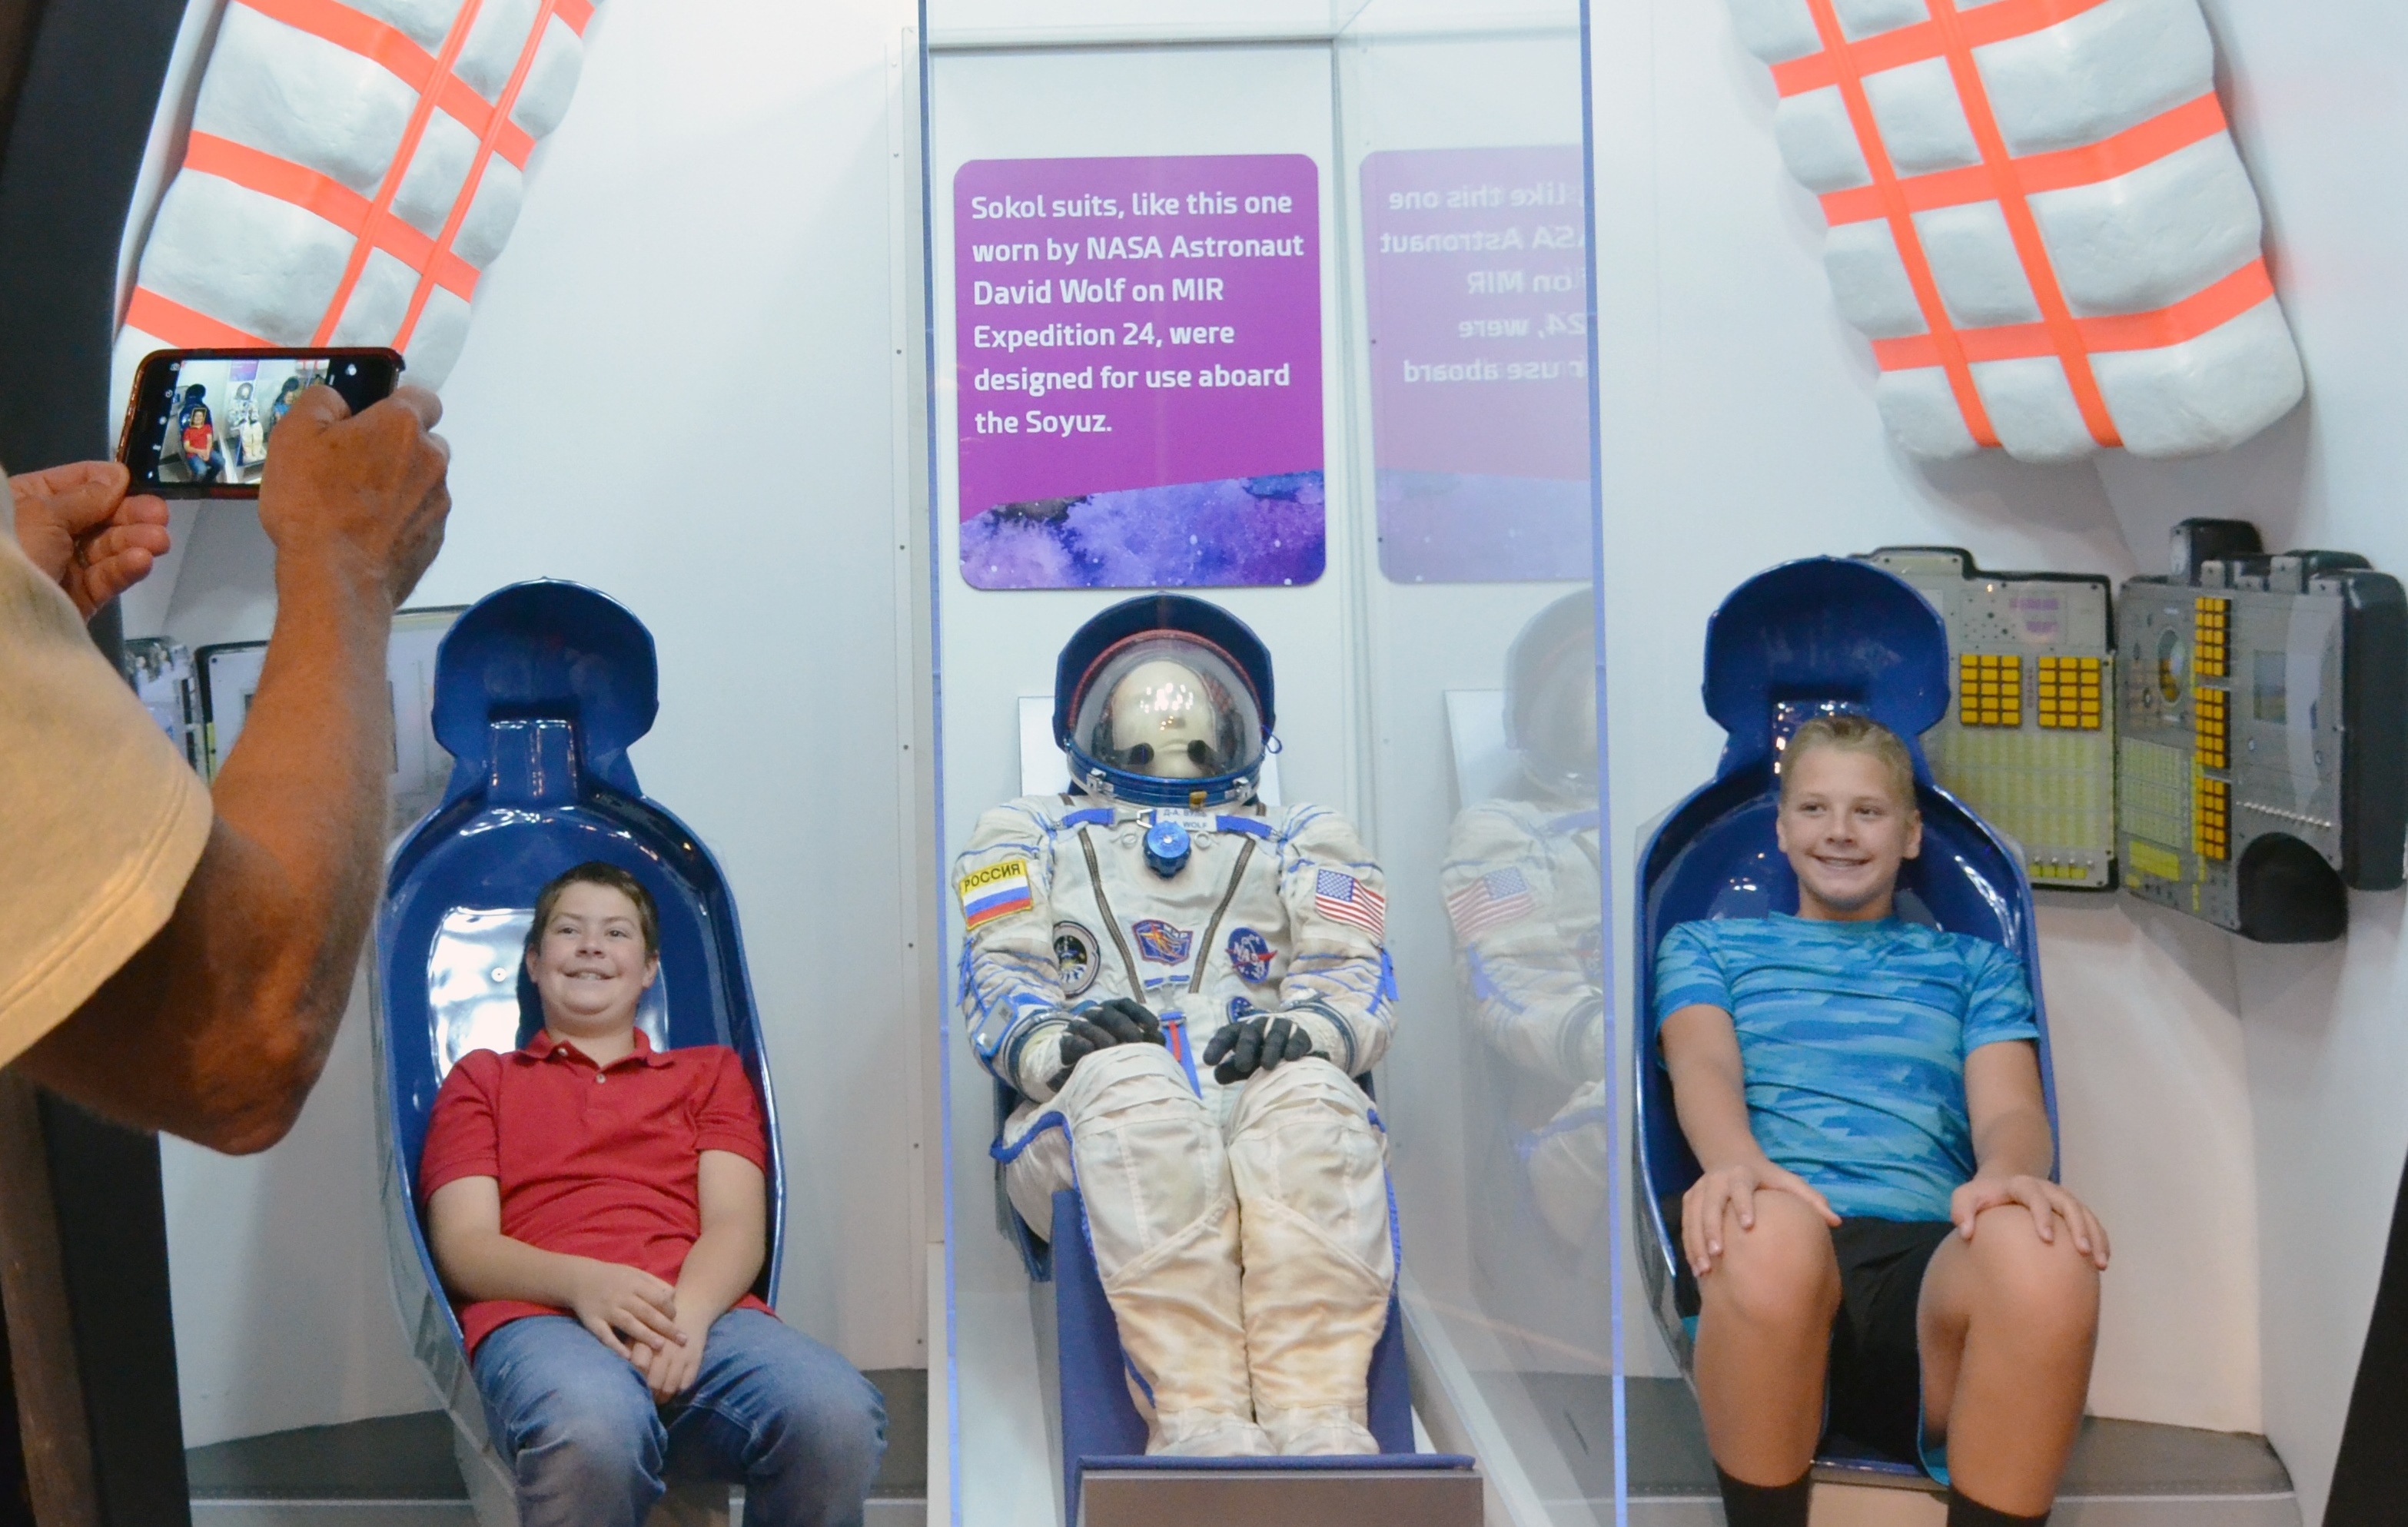 This recreation of the Soyuz is a great photo opportunity for families at the world's largest children's museum.